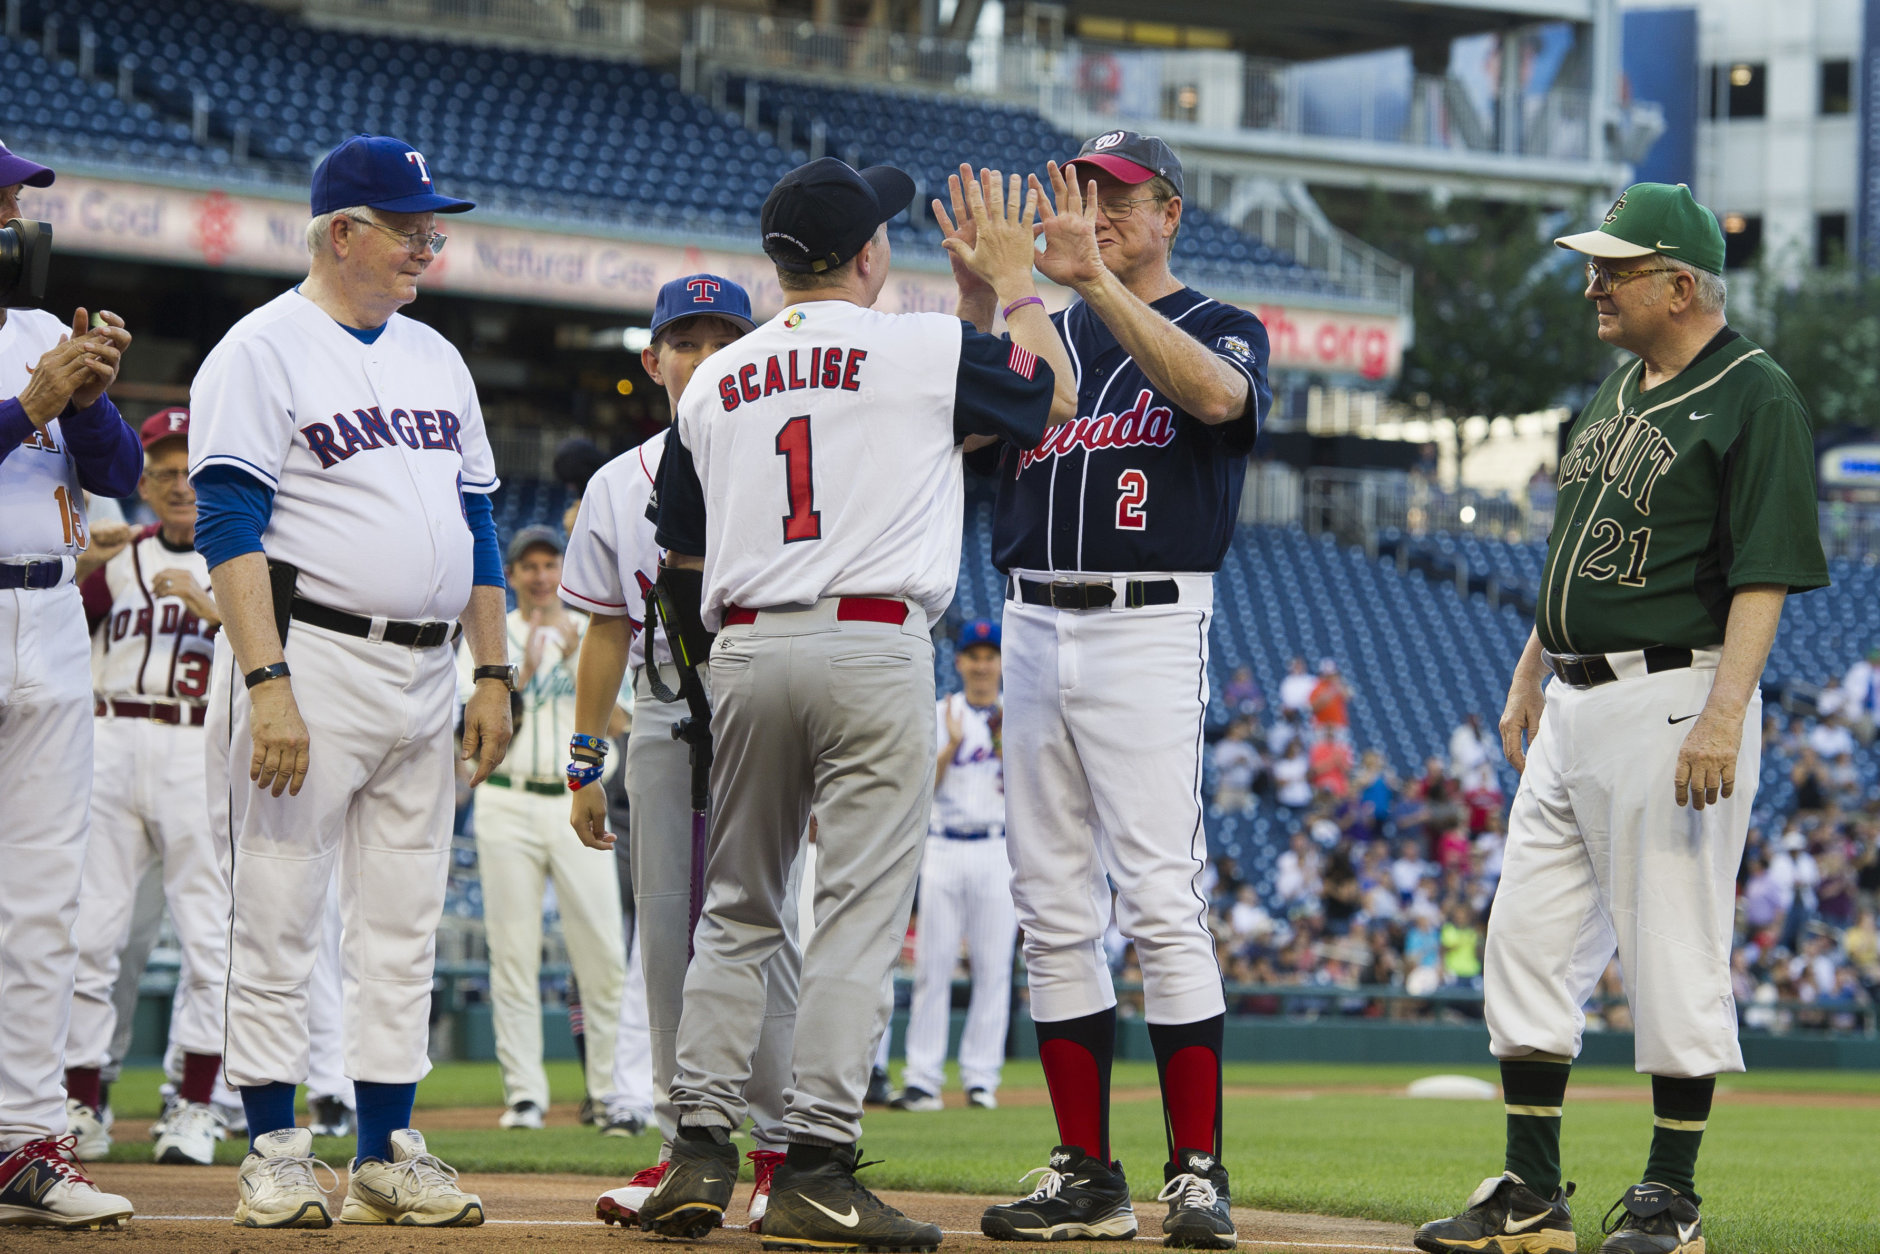 Rep. Steve Scalise, R-Louisiana, center, is announced onto the field at the start of the 57th Congressional Baseball Game at National's Park in Washington, Thursday, June 14, 2018. On June 14, 2017, Scalise and some other Congressional members were victims of a shooting at the baseball field they were practicing on in Alexandria, Va. (AP Photo/Cliff Owen)